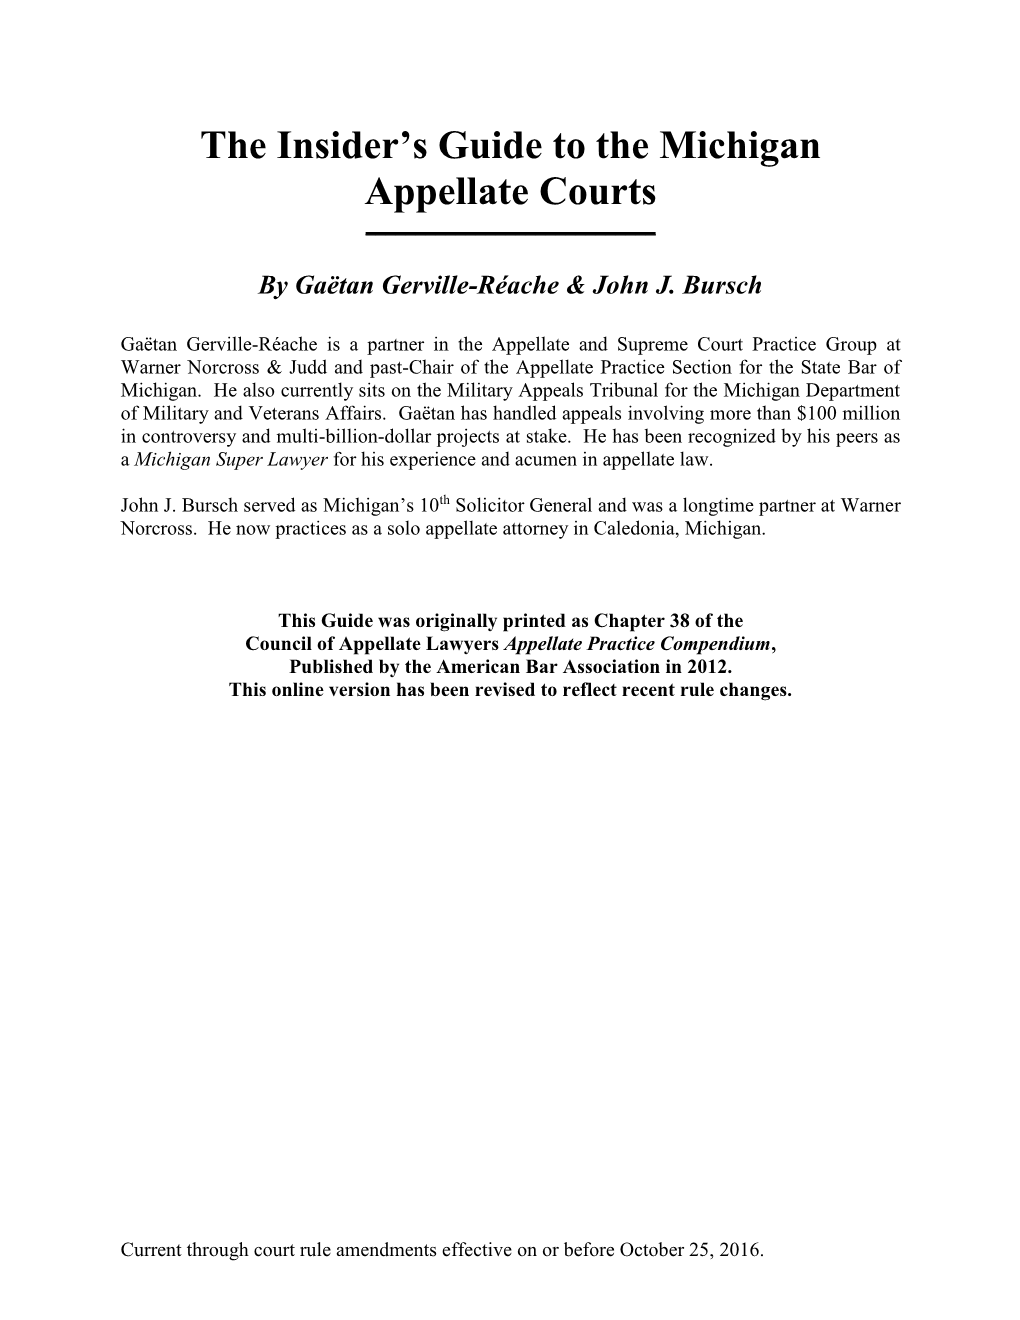 The Insider's Guide to the Michigan Appellate Courts